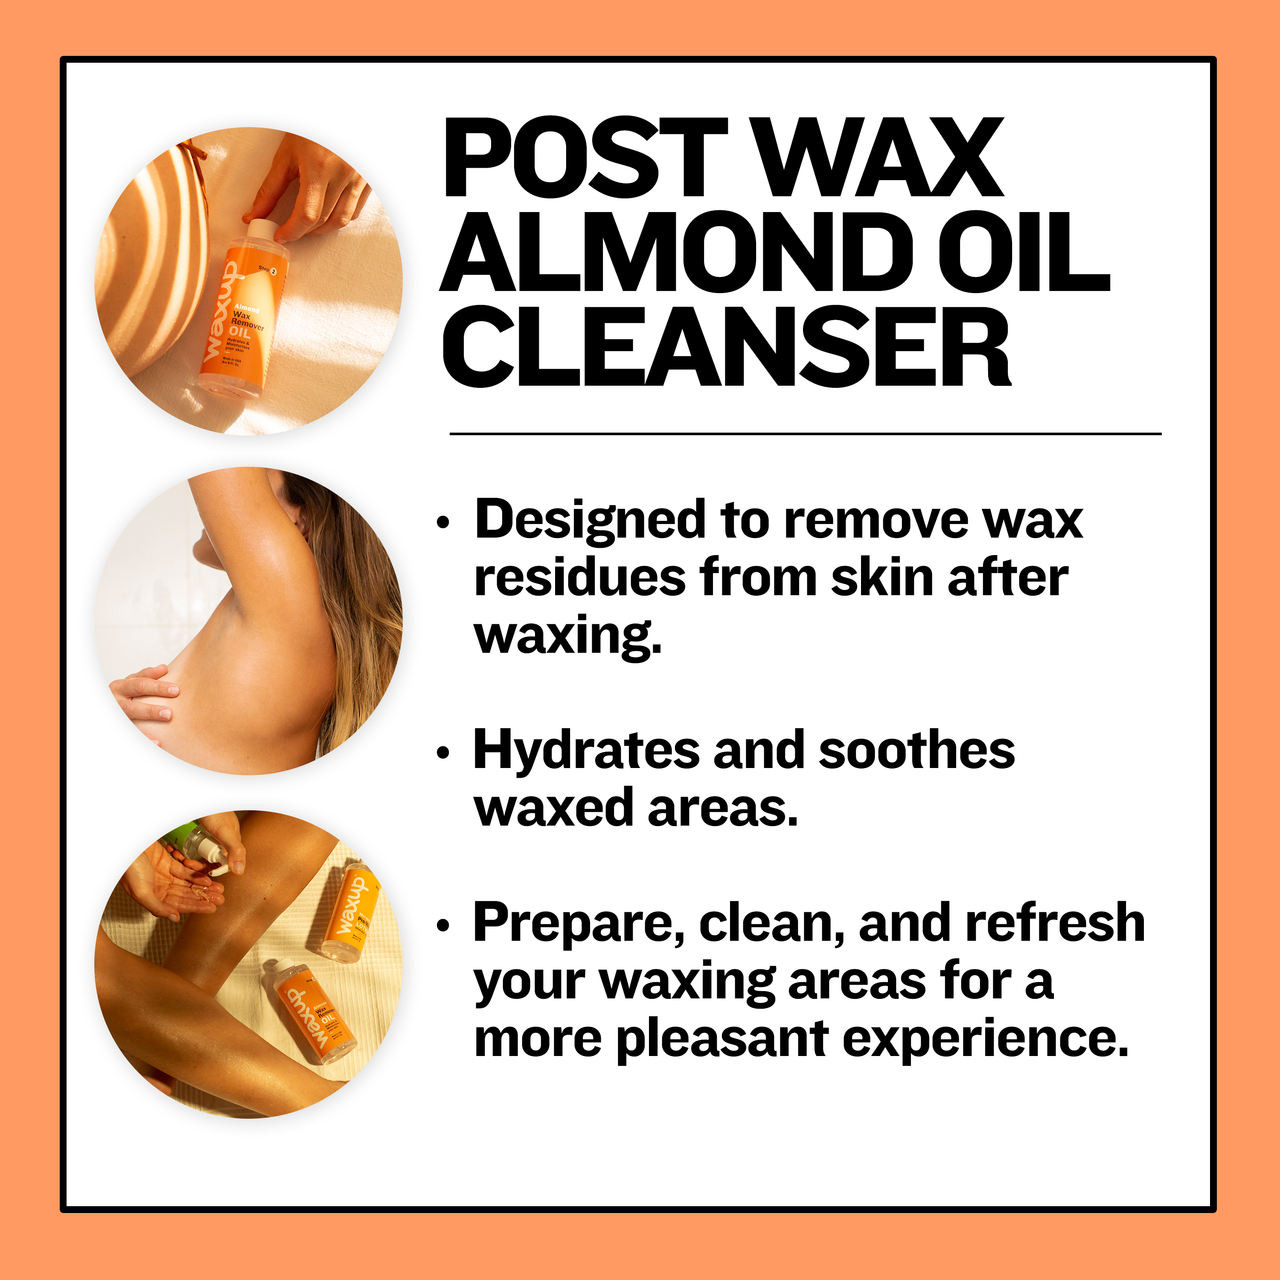 After Wax Care, Almond Oil - thatswaxup -  - Post Waxing Skin Care - waxup hair removal wax body waxing kit women and men professional waxing supplies